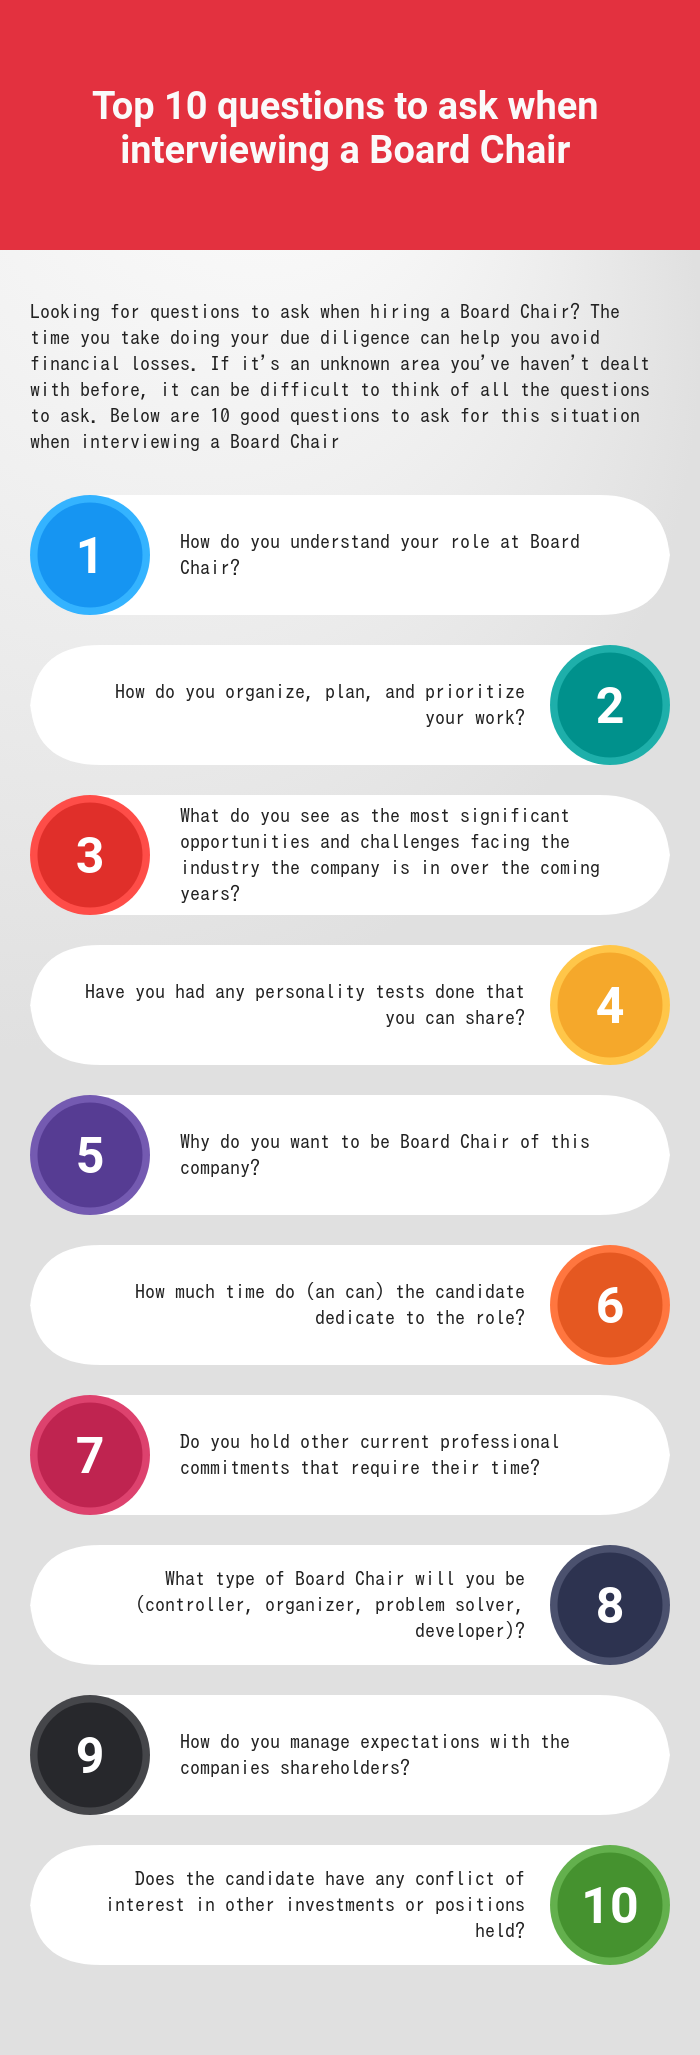 Top 10 questions to ask when interviewing a Board Chair